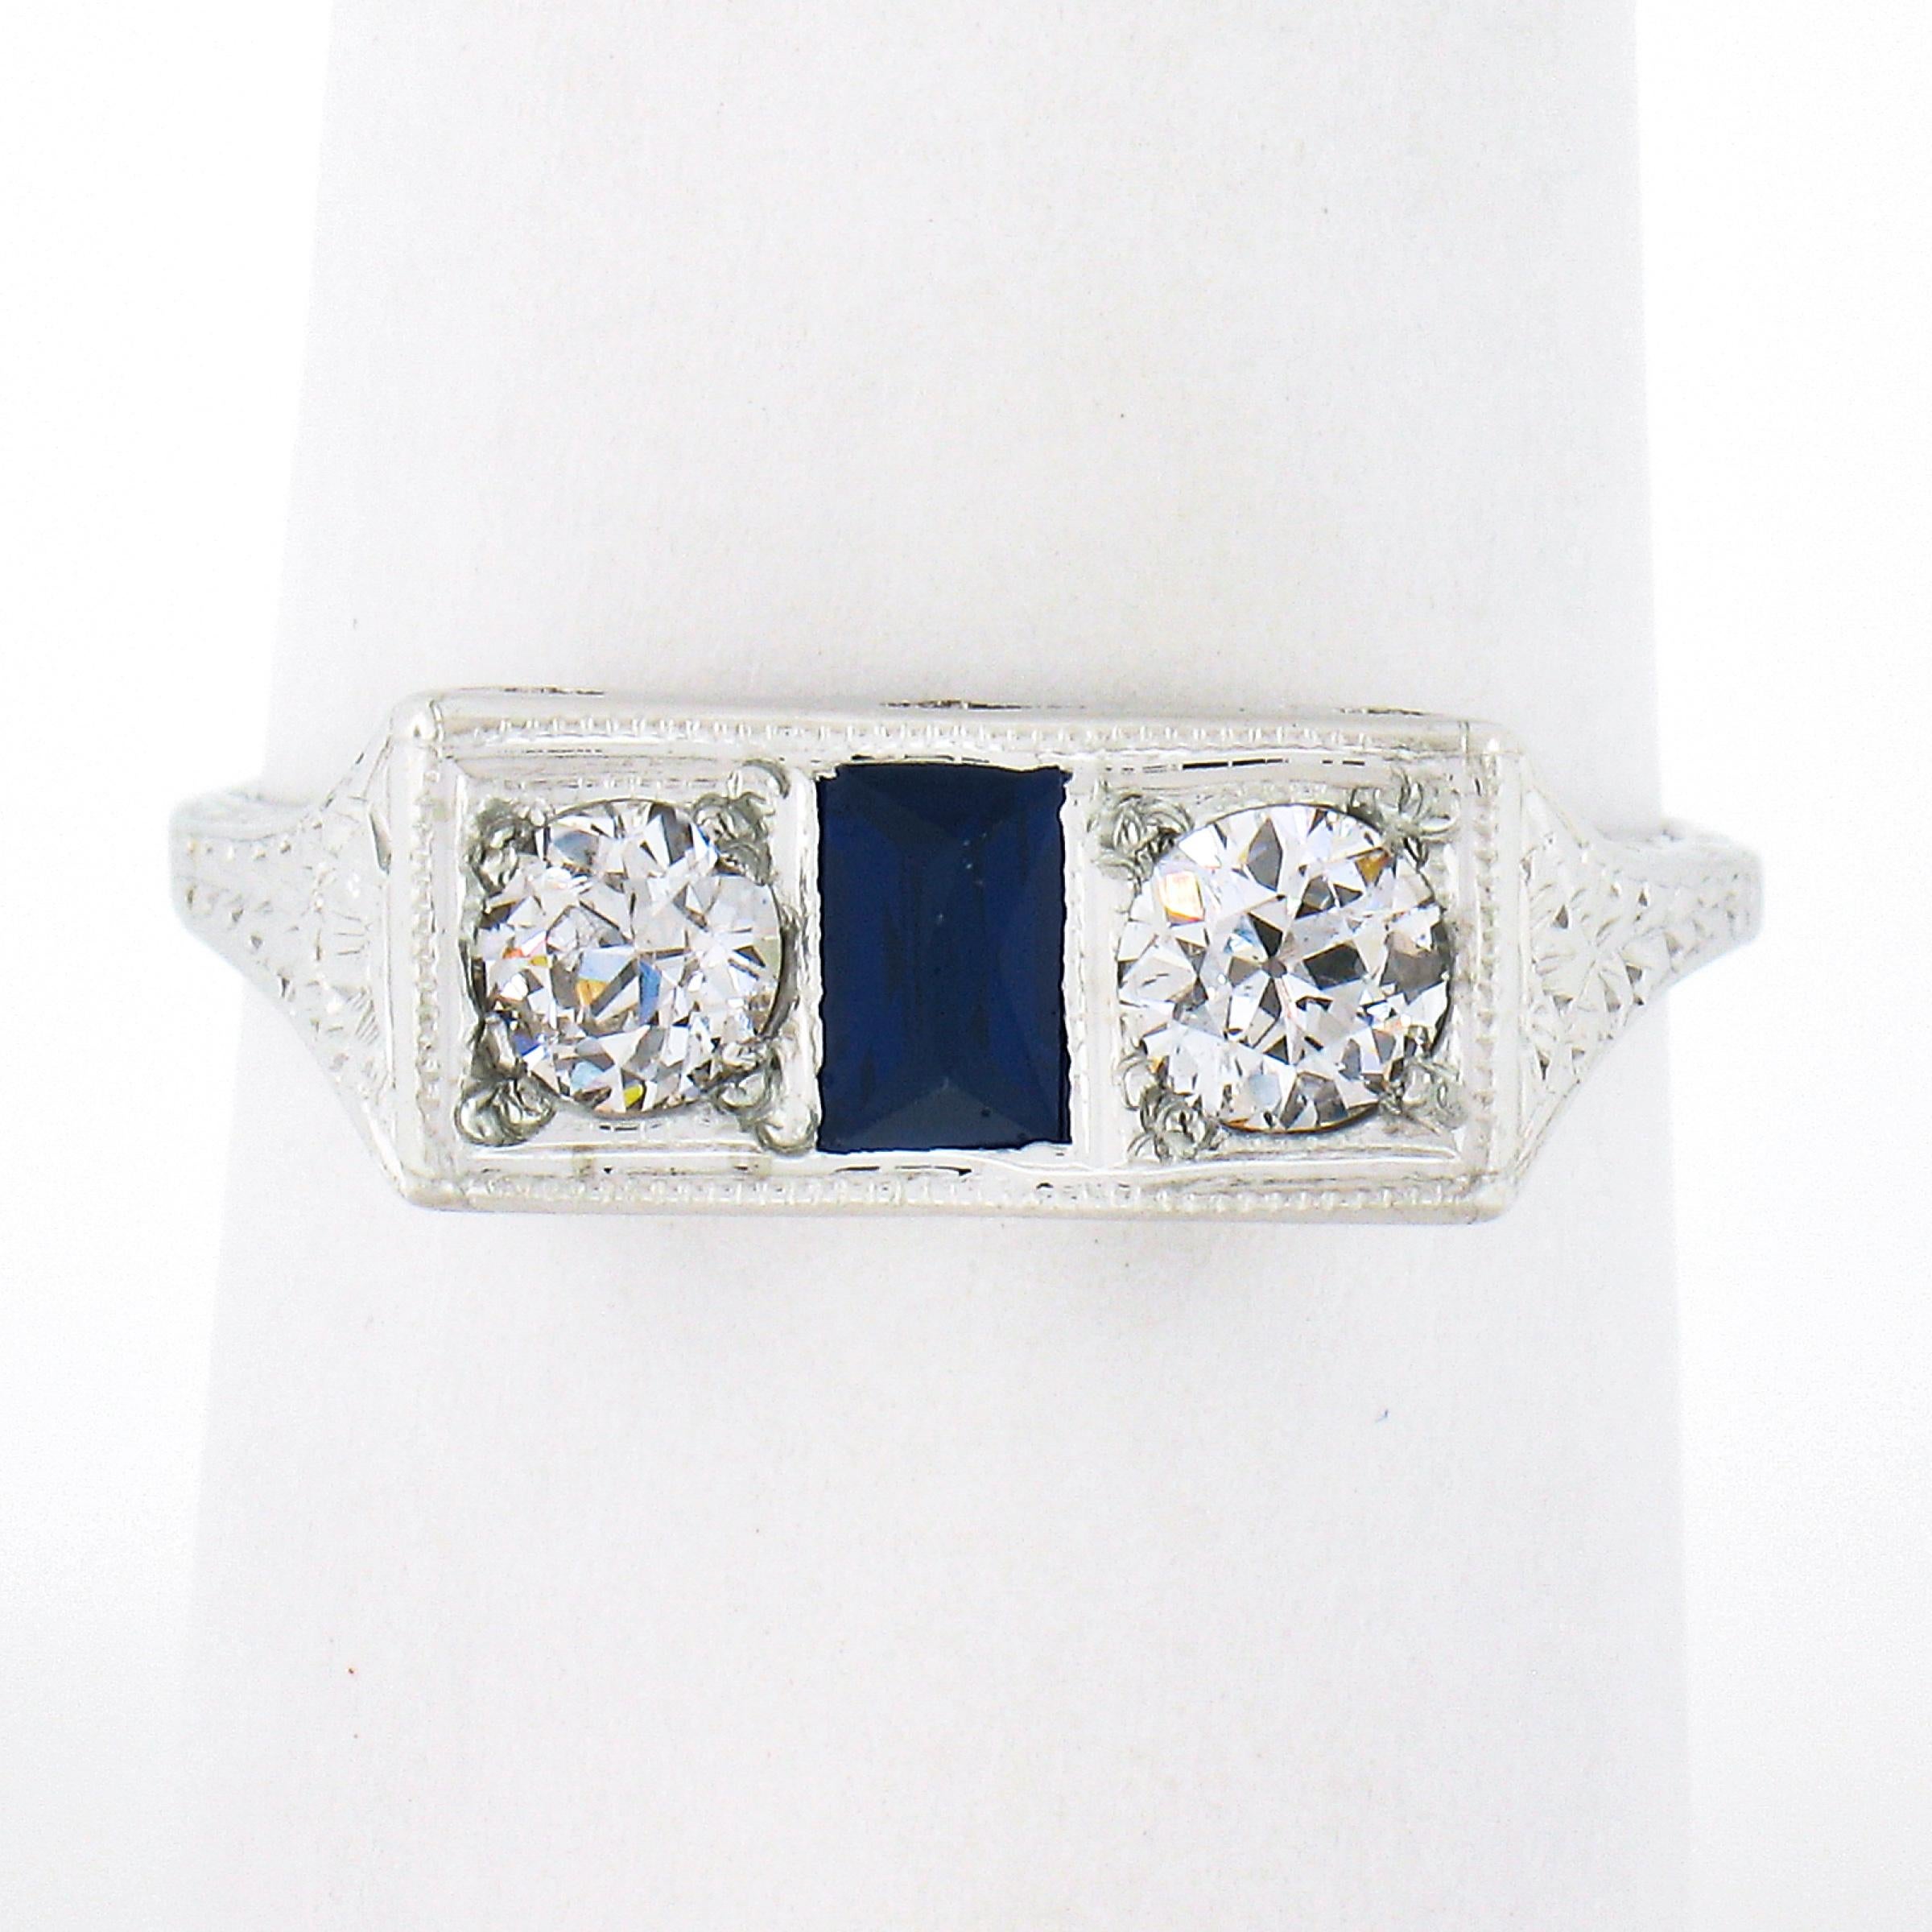 This gorgeous, all original antique moi et toi band ring was crafted in solid 20k white gold during the art deco period and features two fine quality old European cit diamonds flanked with a French baguette cut sapphire in between. These diamonds